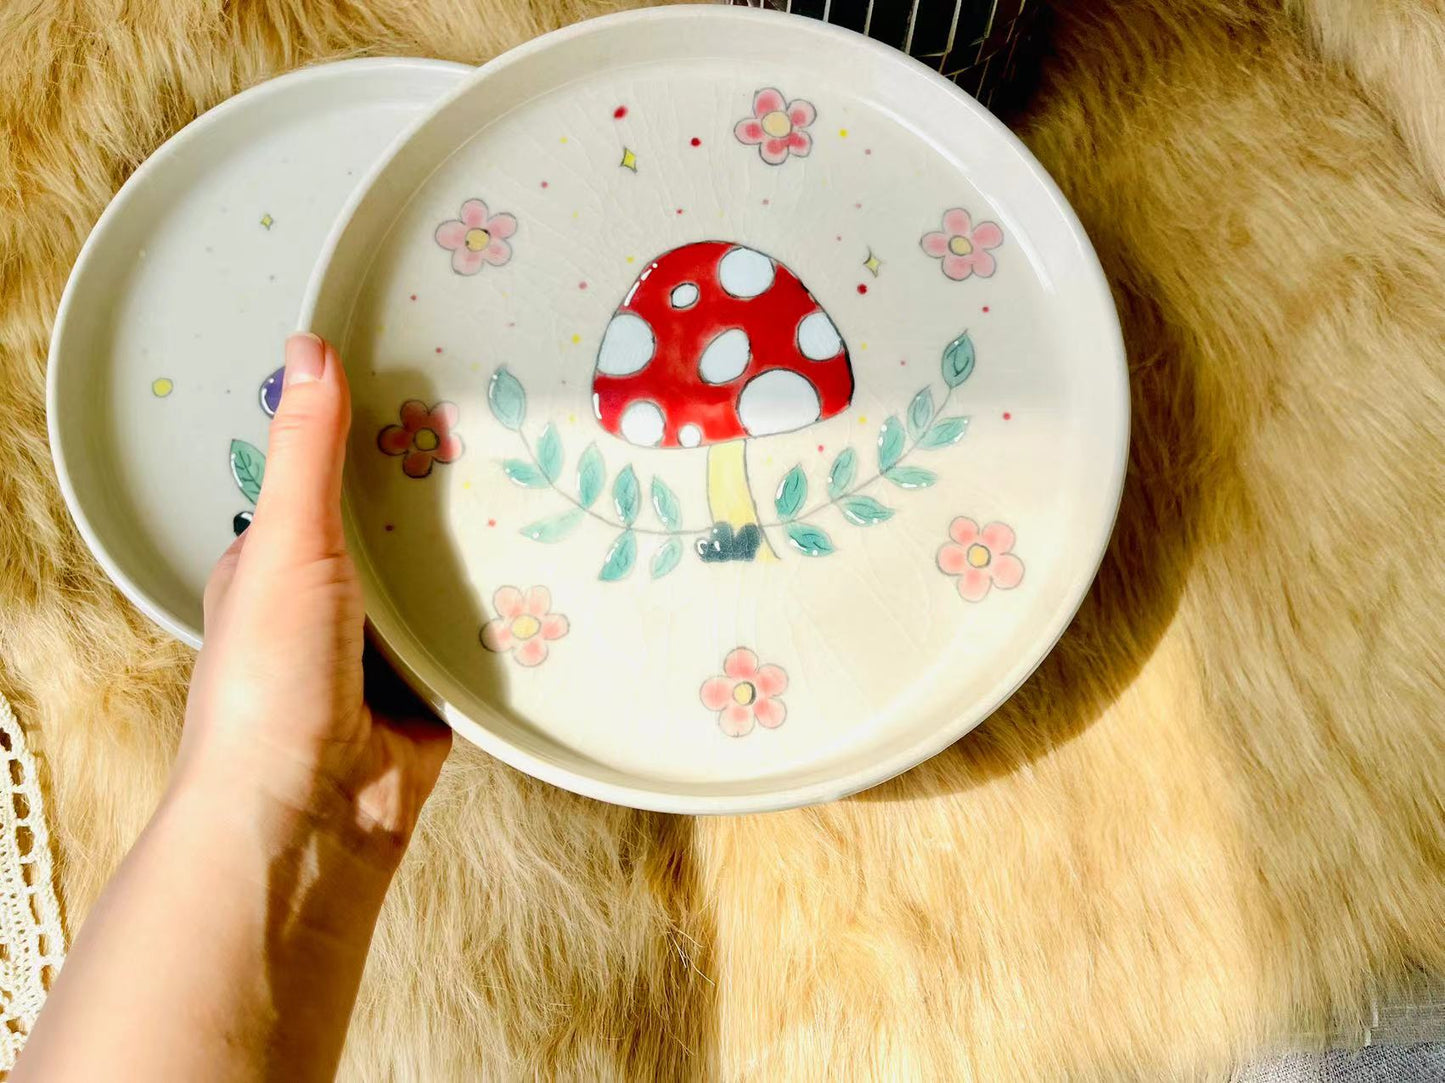 Handcrafted Mushroom Ceramic Plate, Personalized Floral Handmade Pottery Dinnerware for Gifts